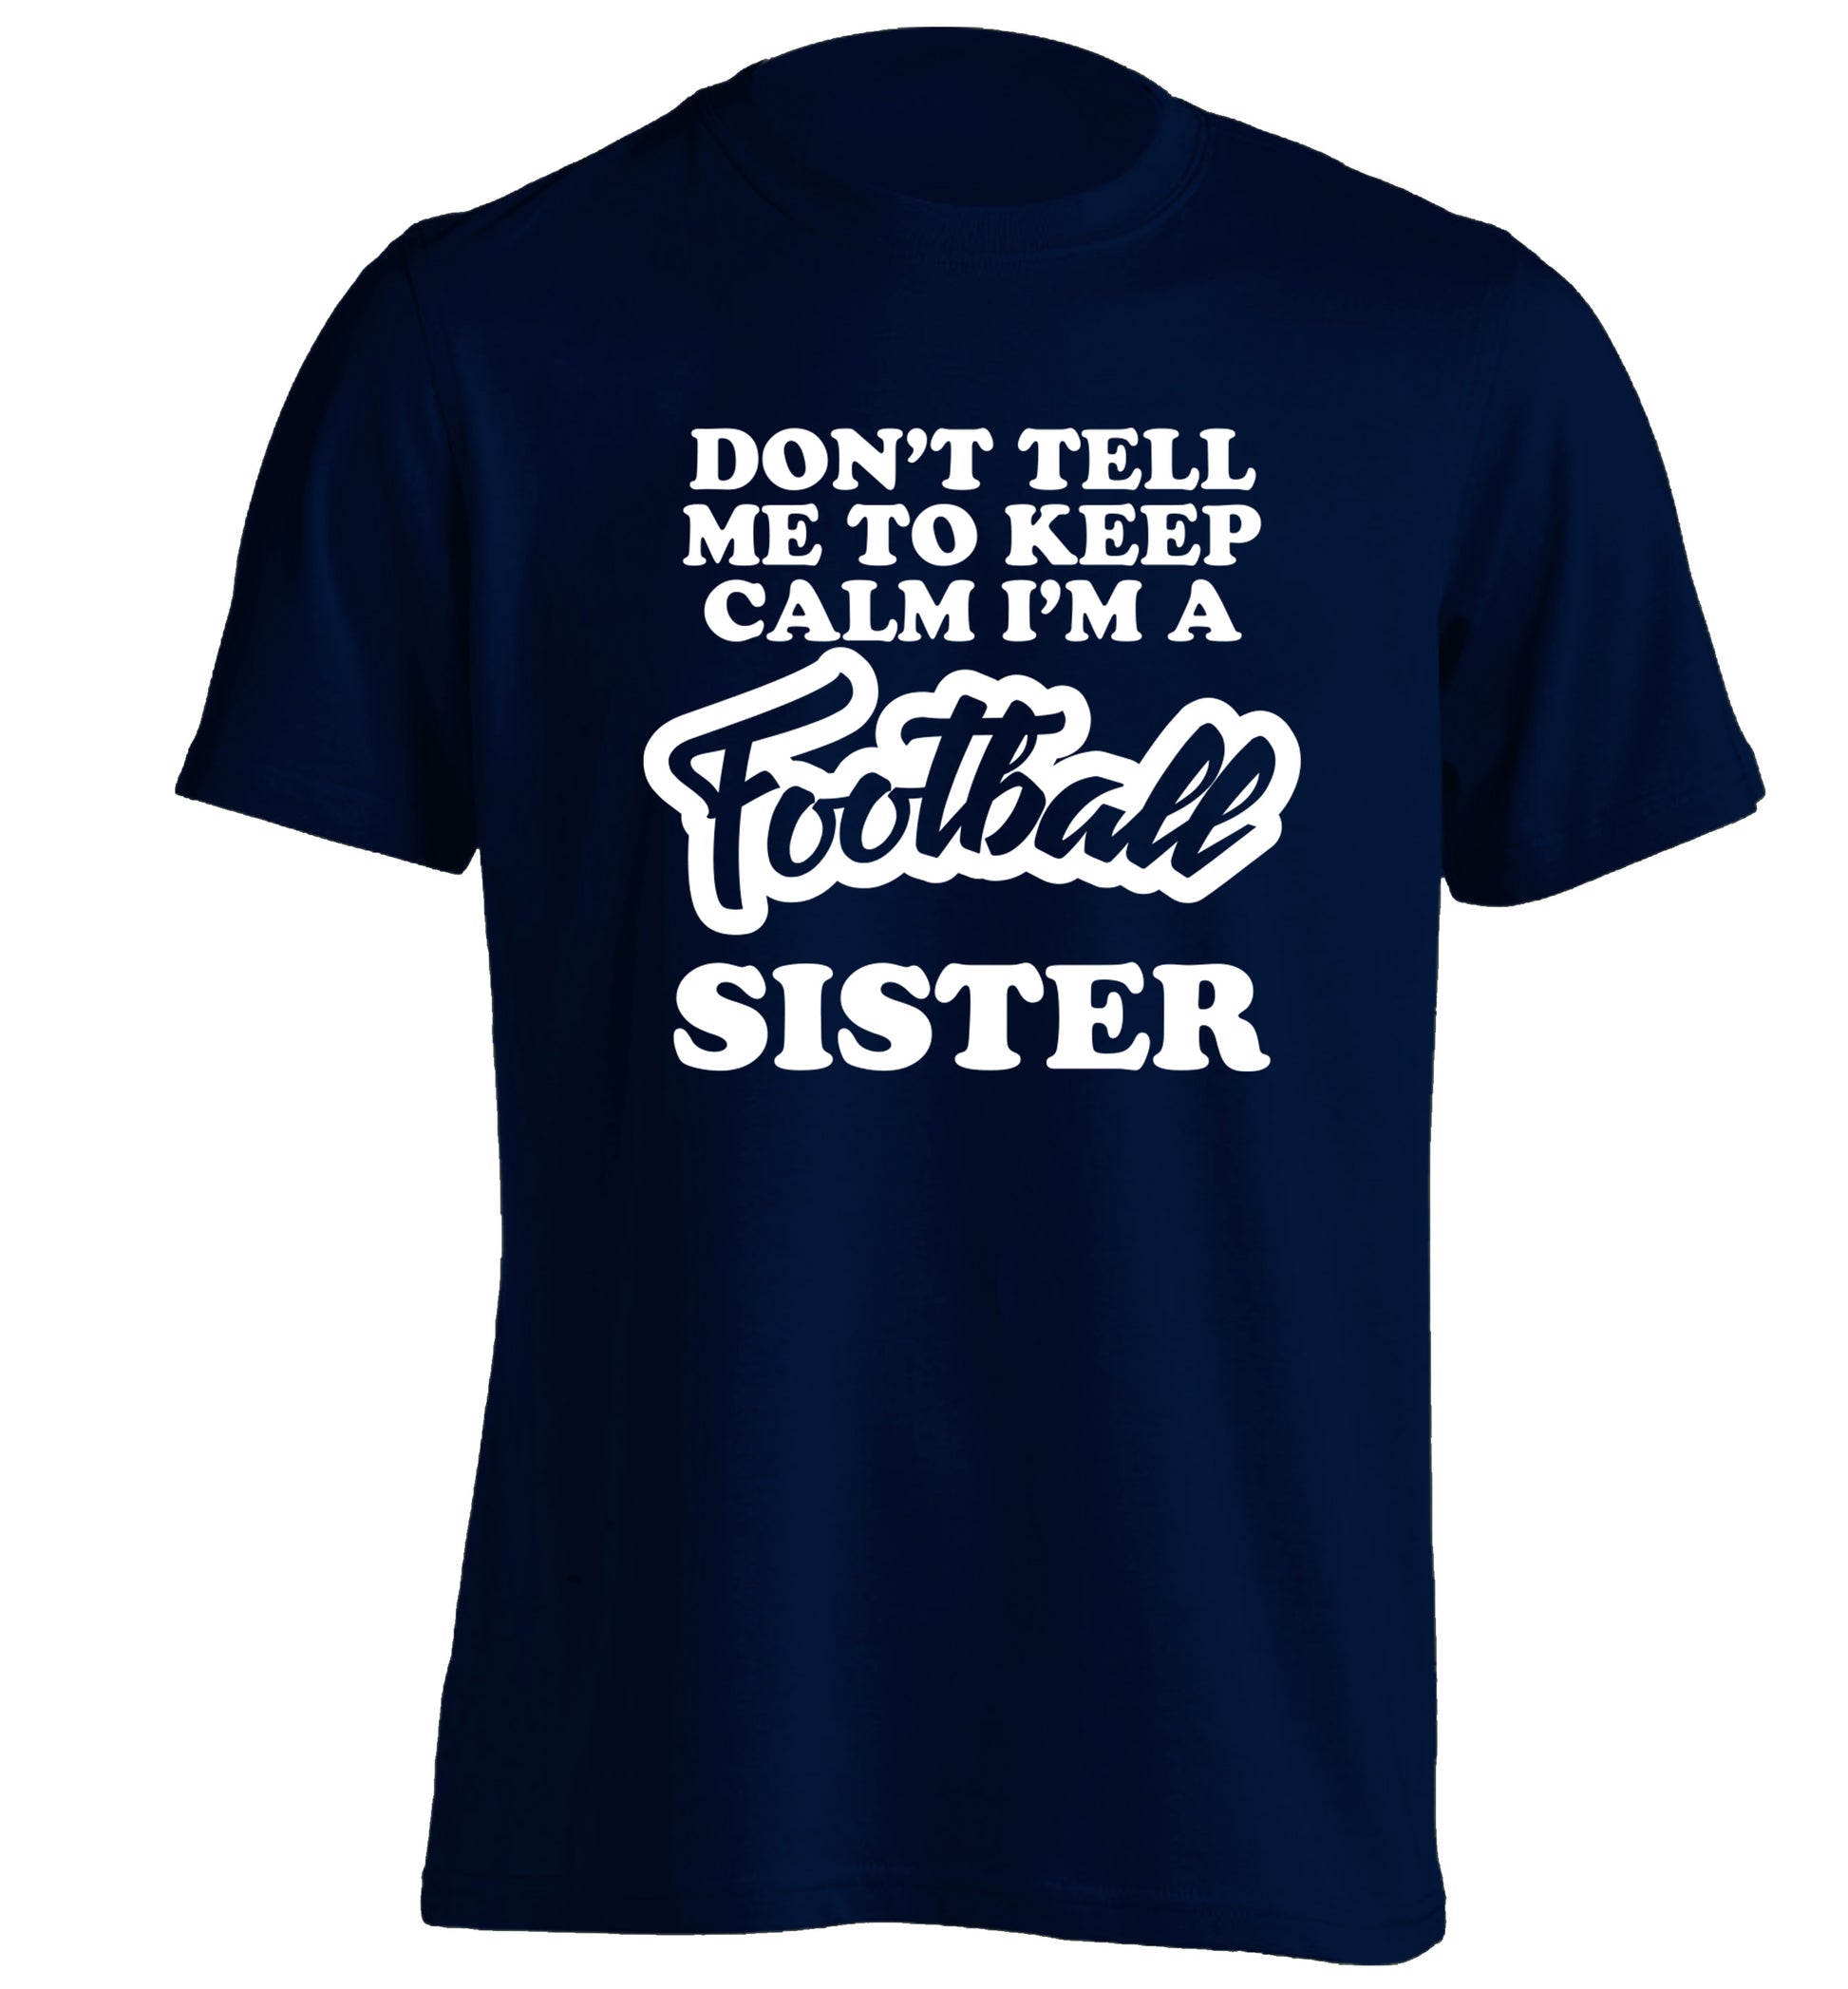 Don't tell me to keep calm I'm a football sister adults unisexnavy Tshirt 2XL